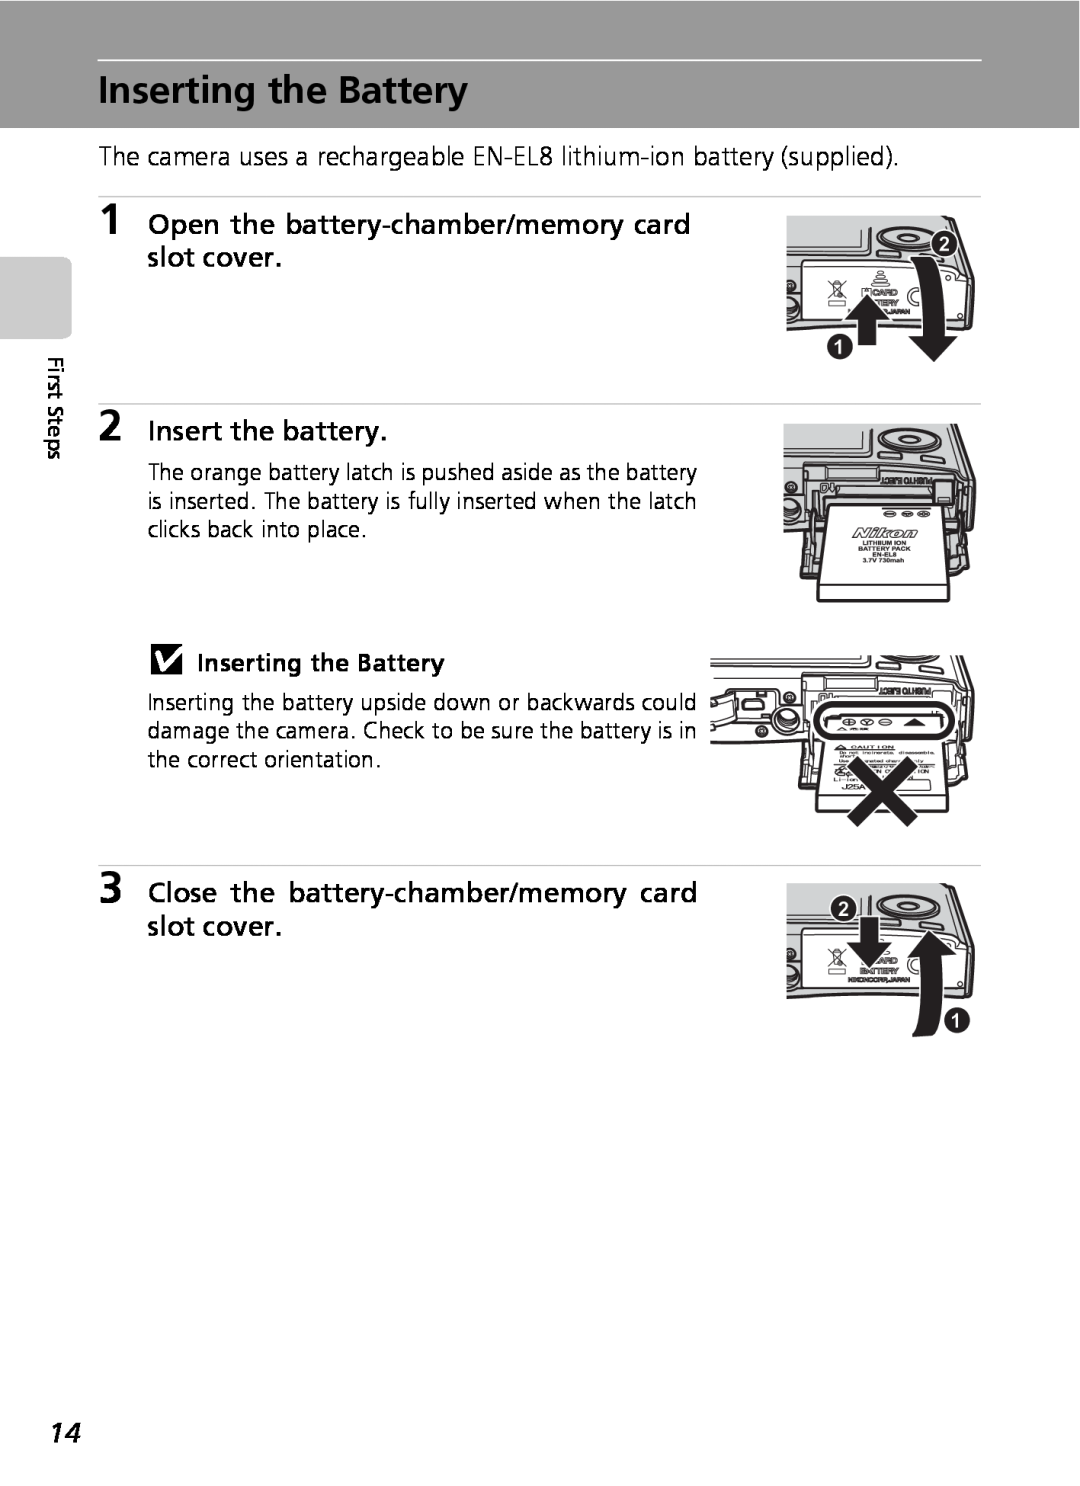 Nikon COOLPIXS9 manual Inserting the Battery, Open the battery-chamber/memorycard slot cover, Insert the battery 